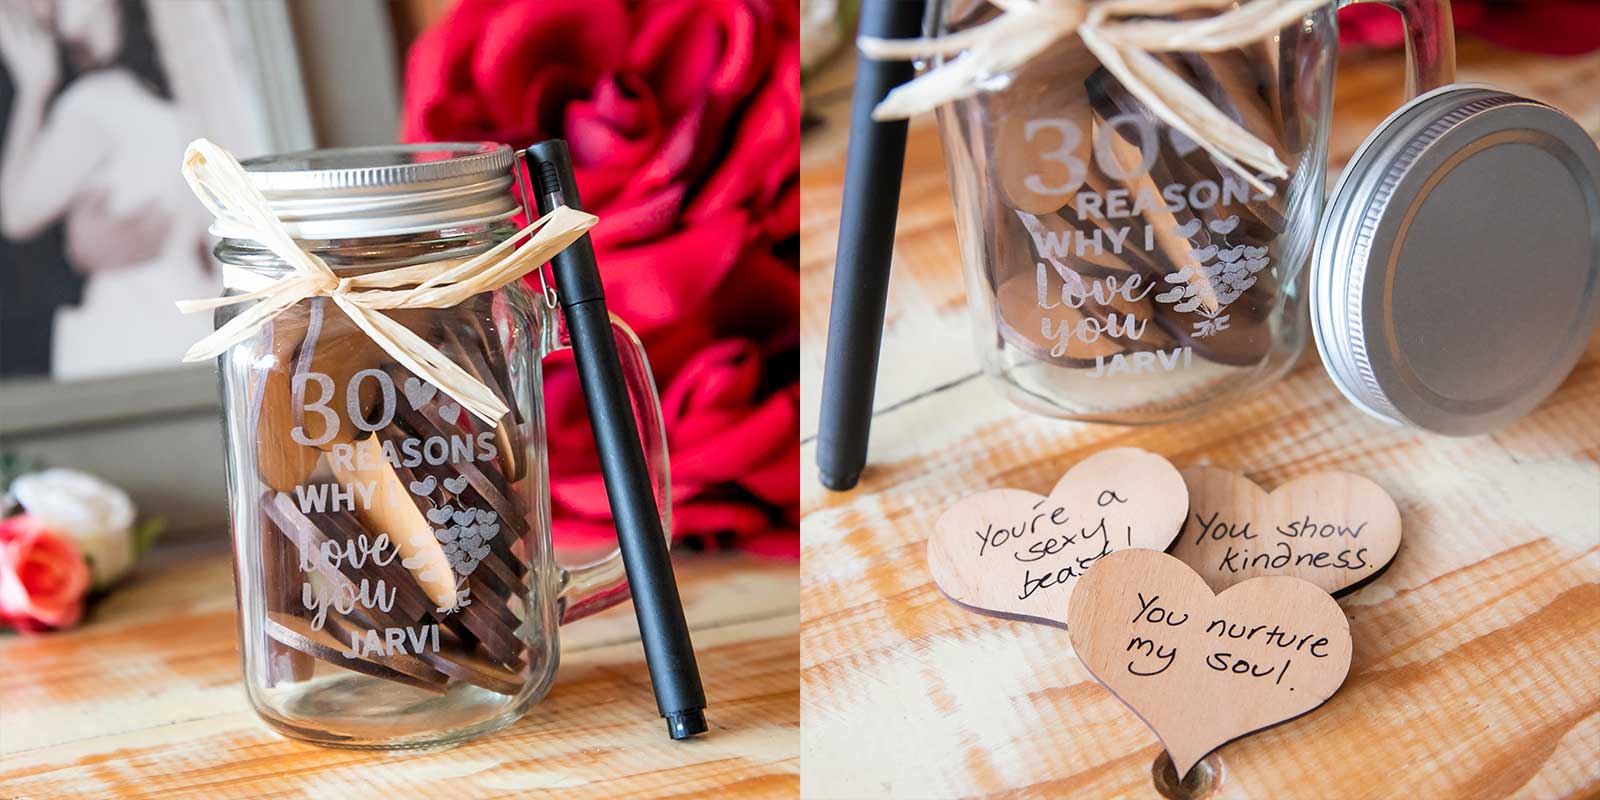 30 Reasons Why I Love you' Engraved Mason Jar with Wooden Hearts